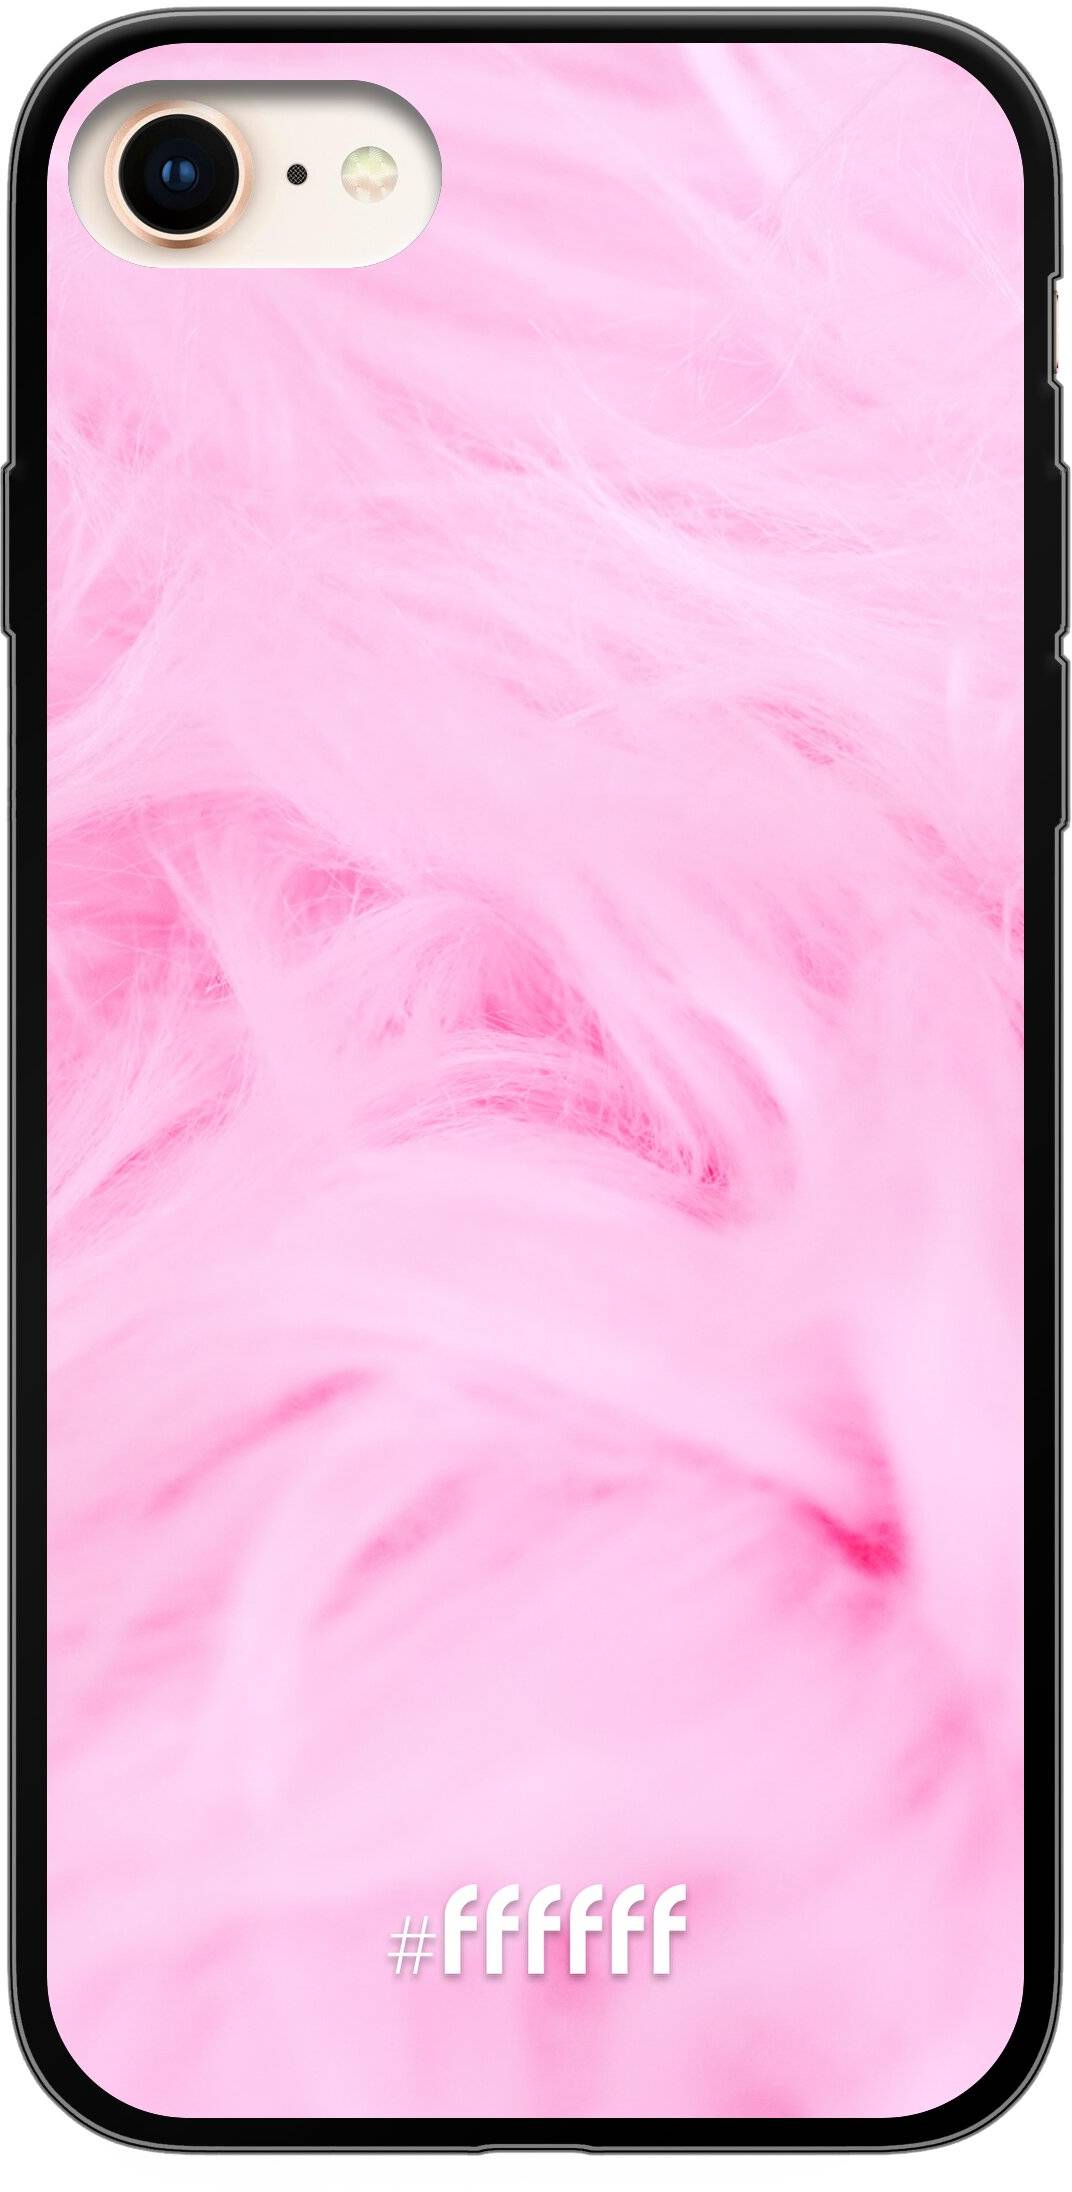 Cotton Candy iPhone 7